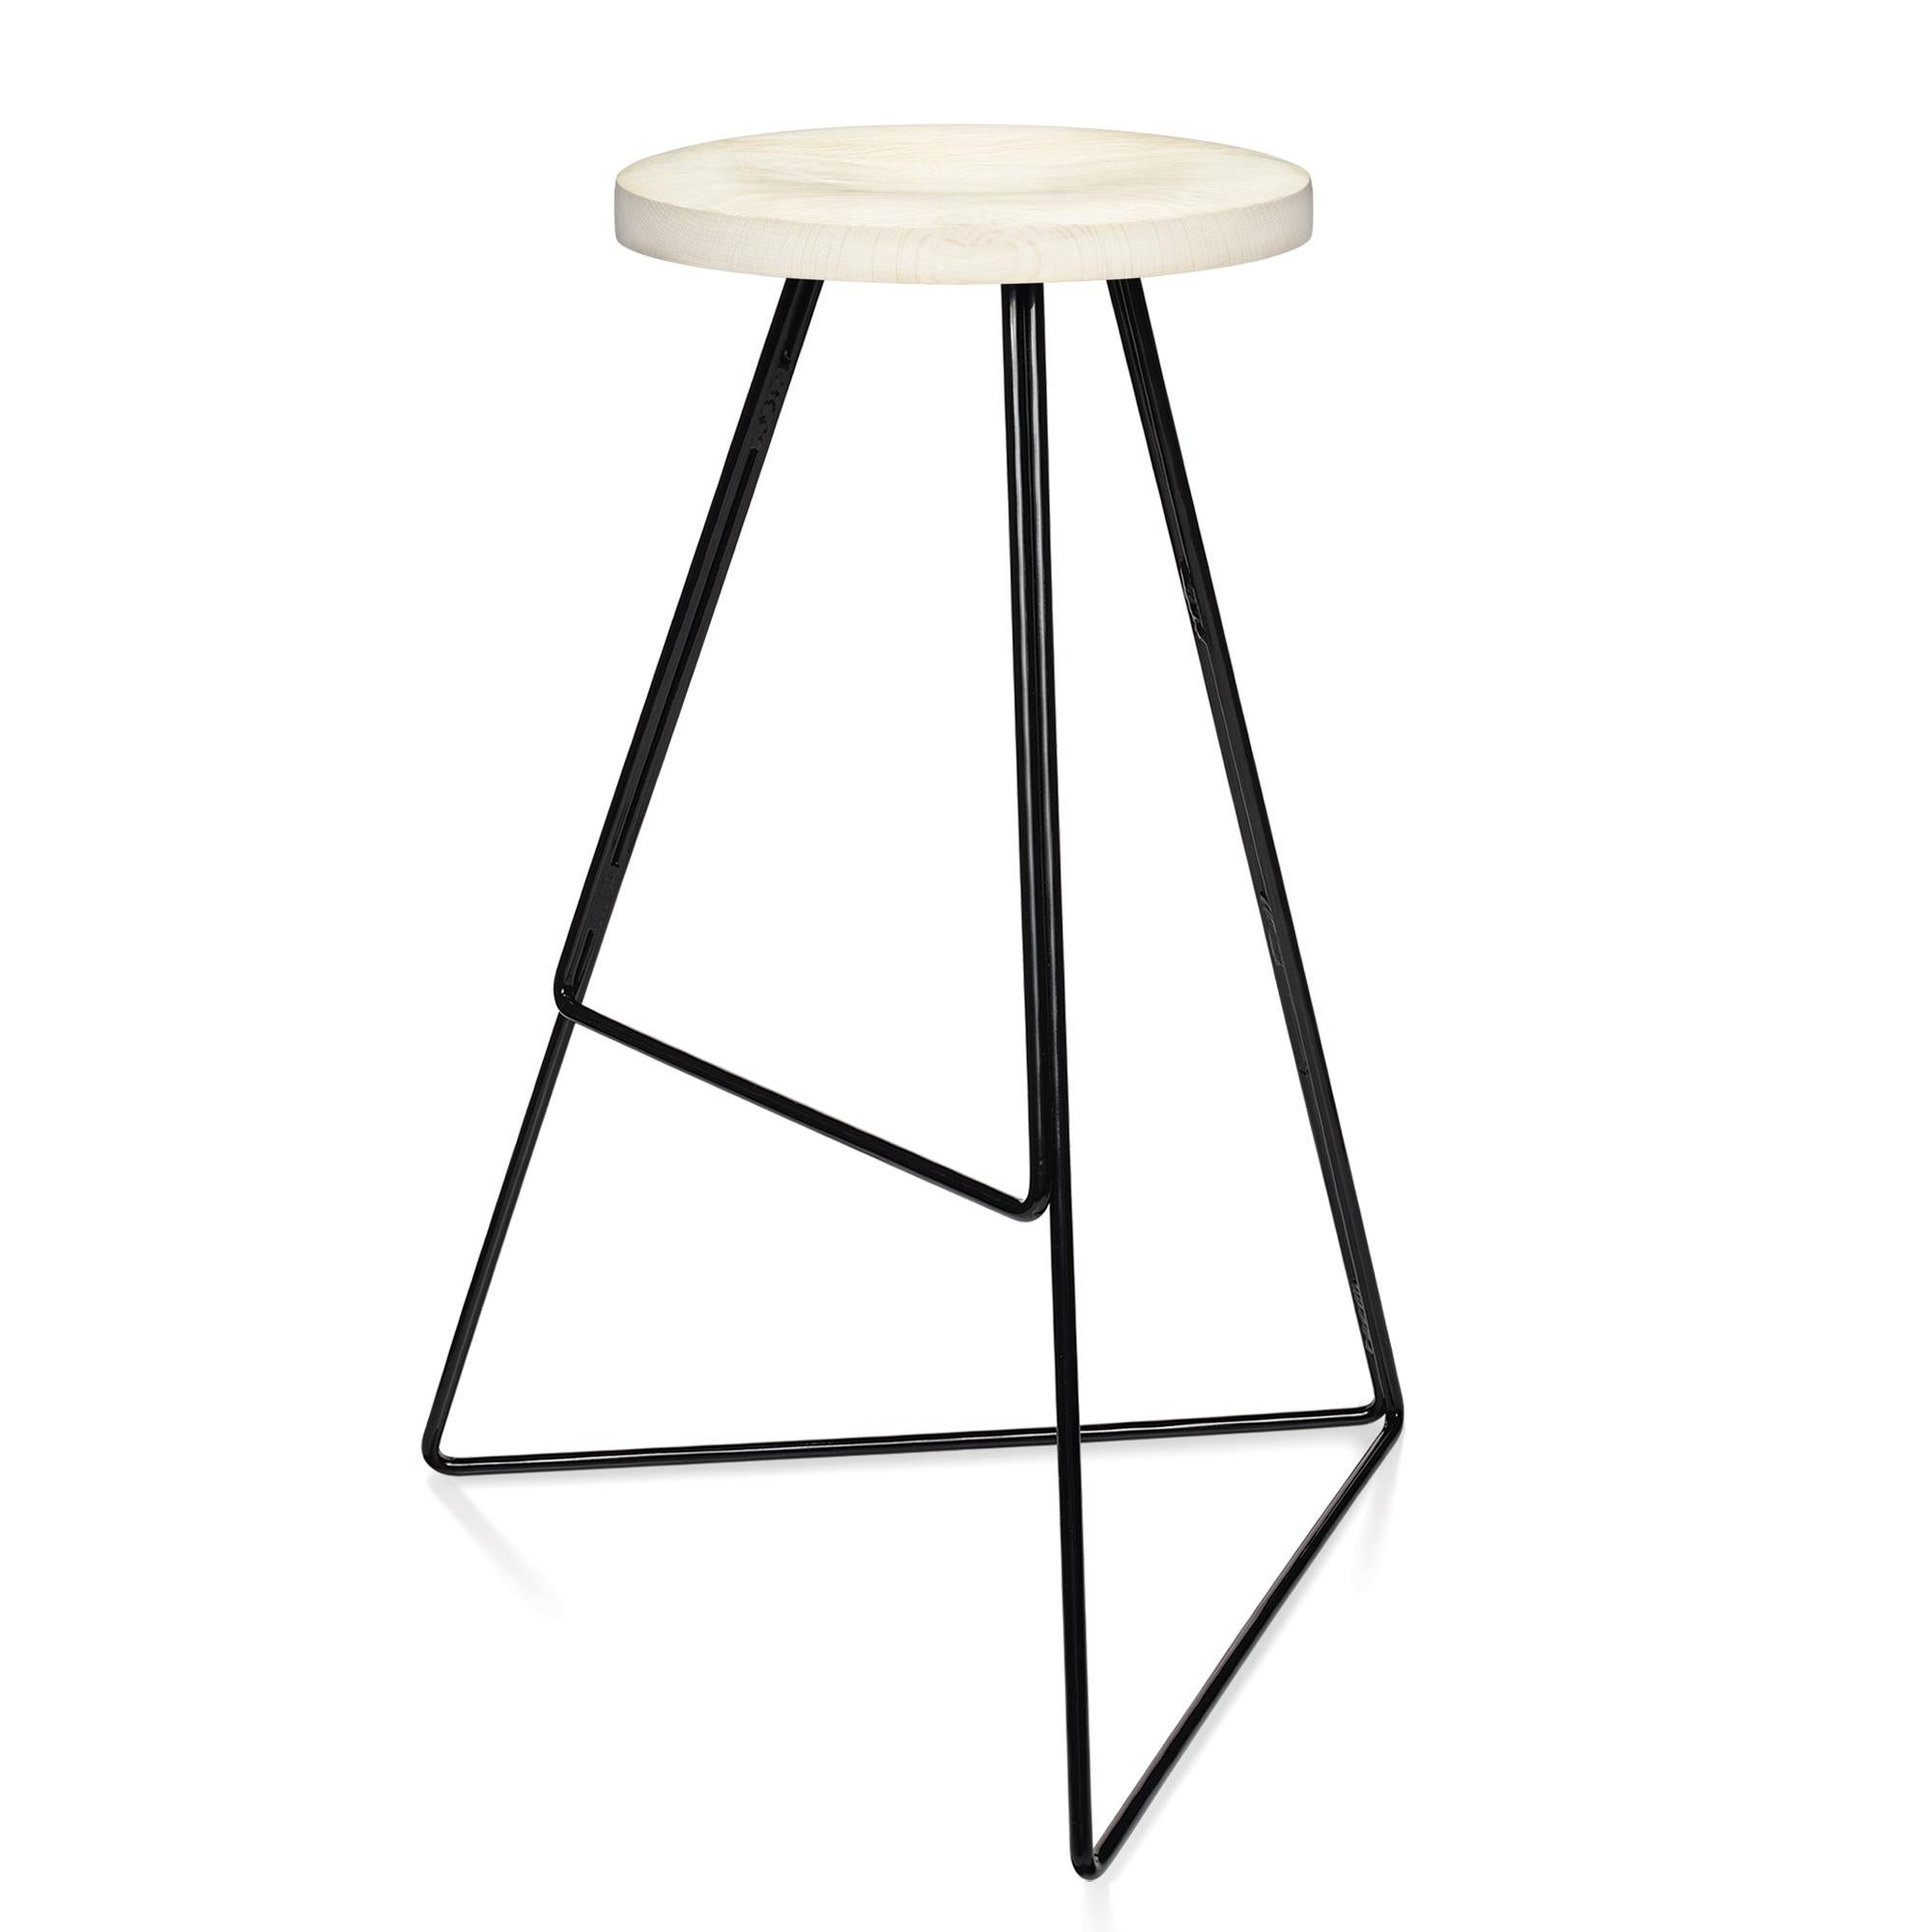 Contemporary The Coleman Stool - Black and Maple, Counter Height. 54 Variations Available. For Sale